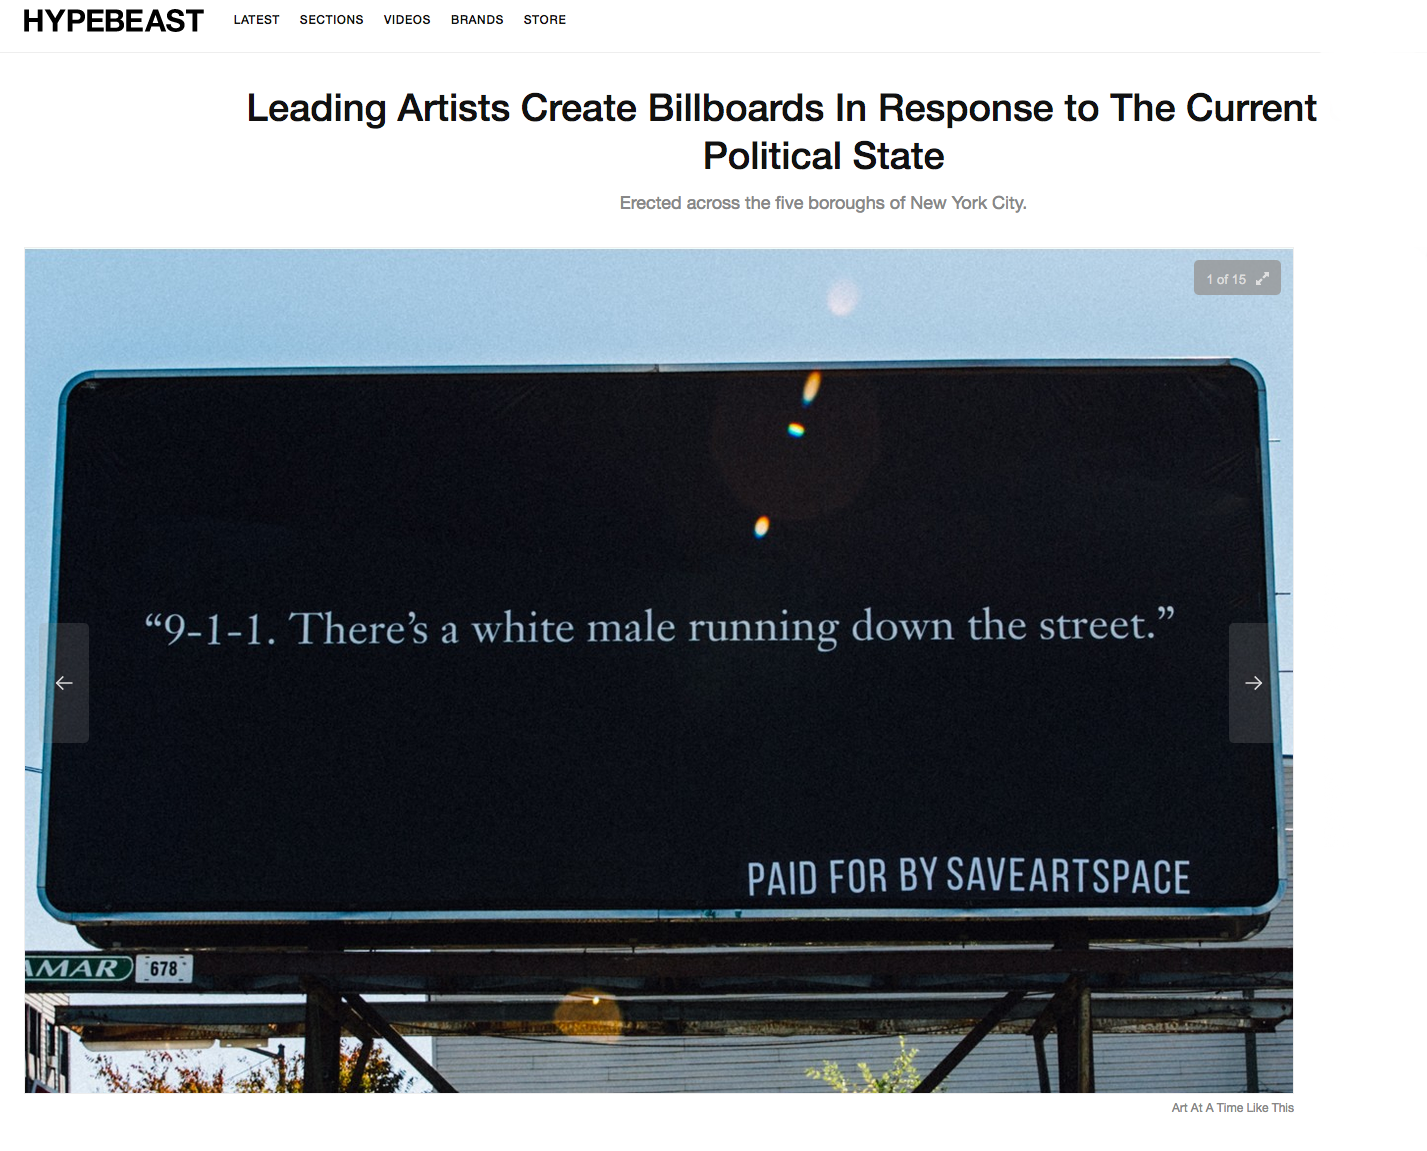 Leading Artists Create Billboards In Response to The Current U.S. Political State - HYPEBEAST 2020